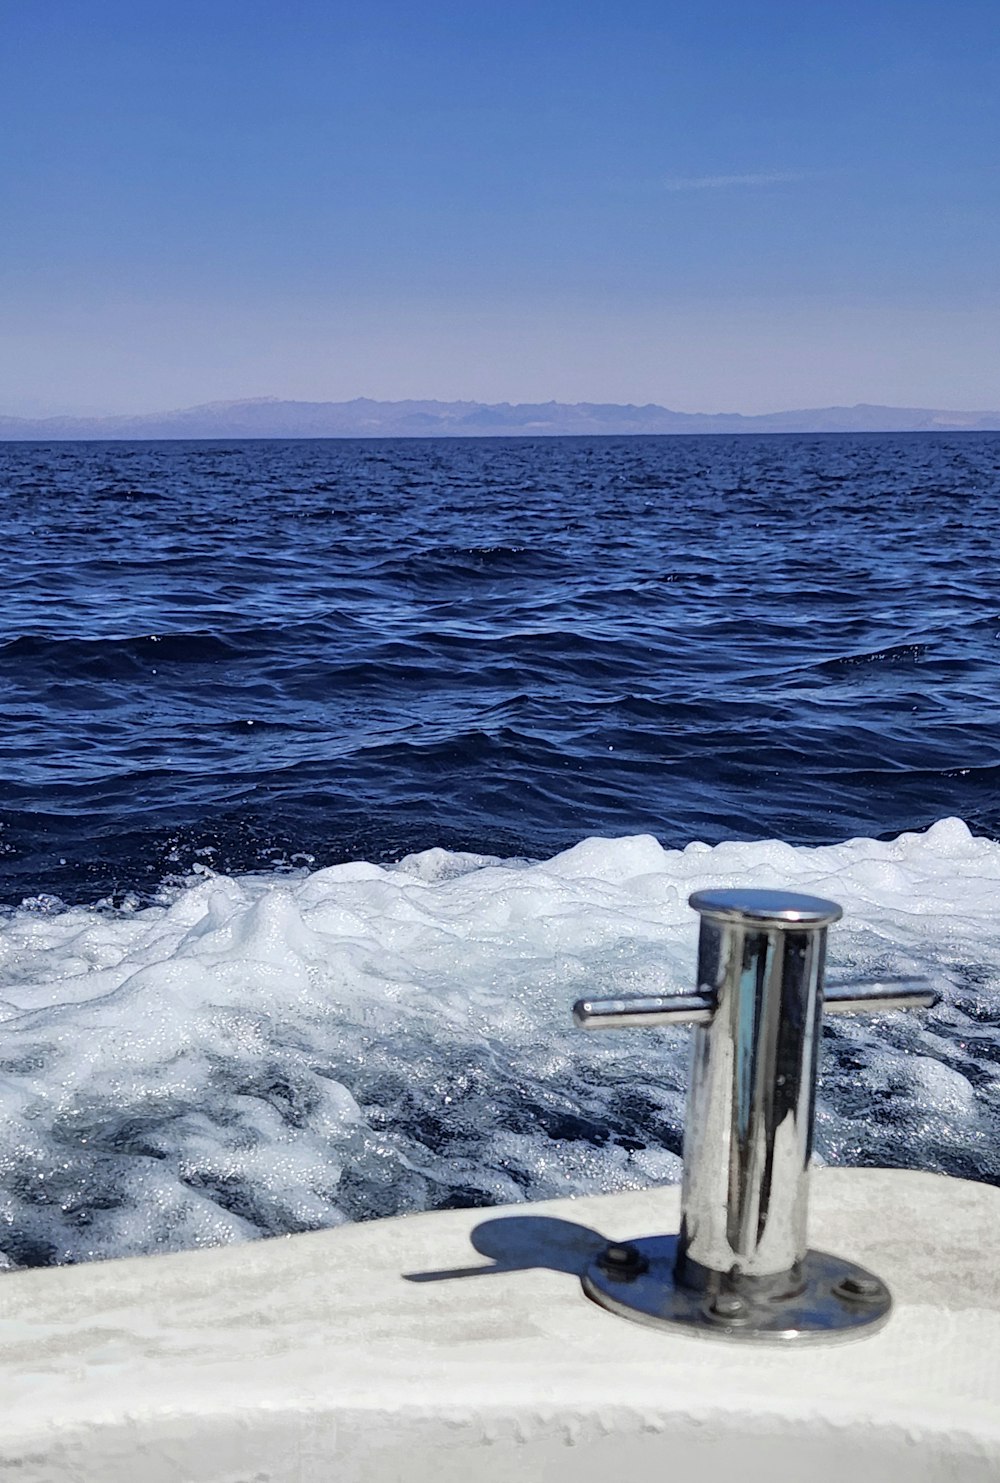 a view of the ocean from a boat